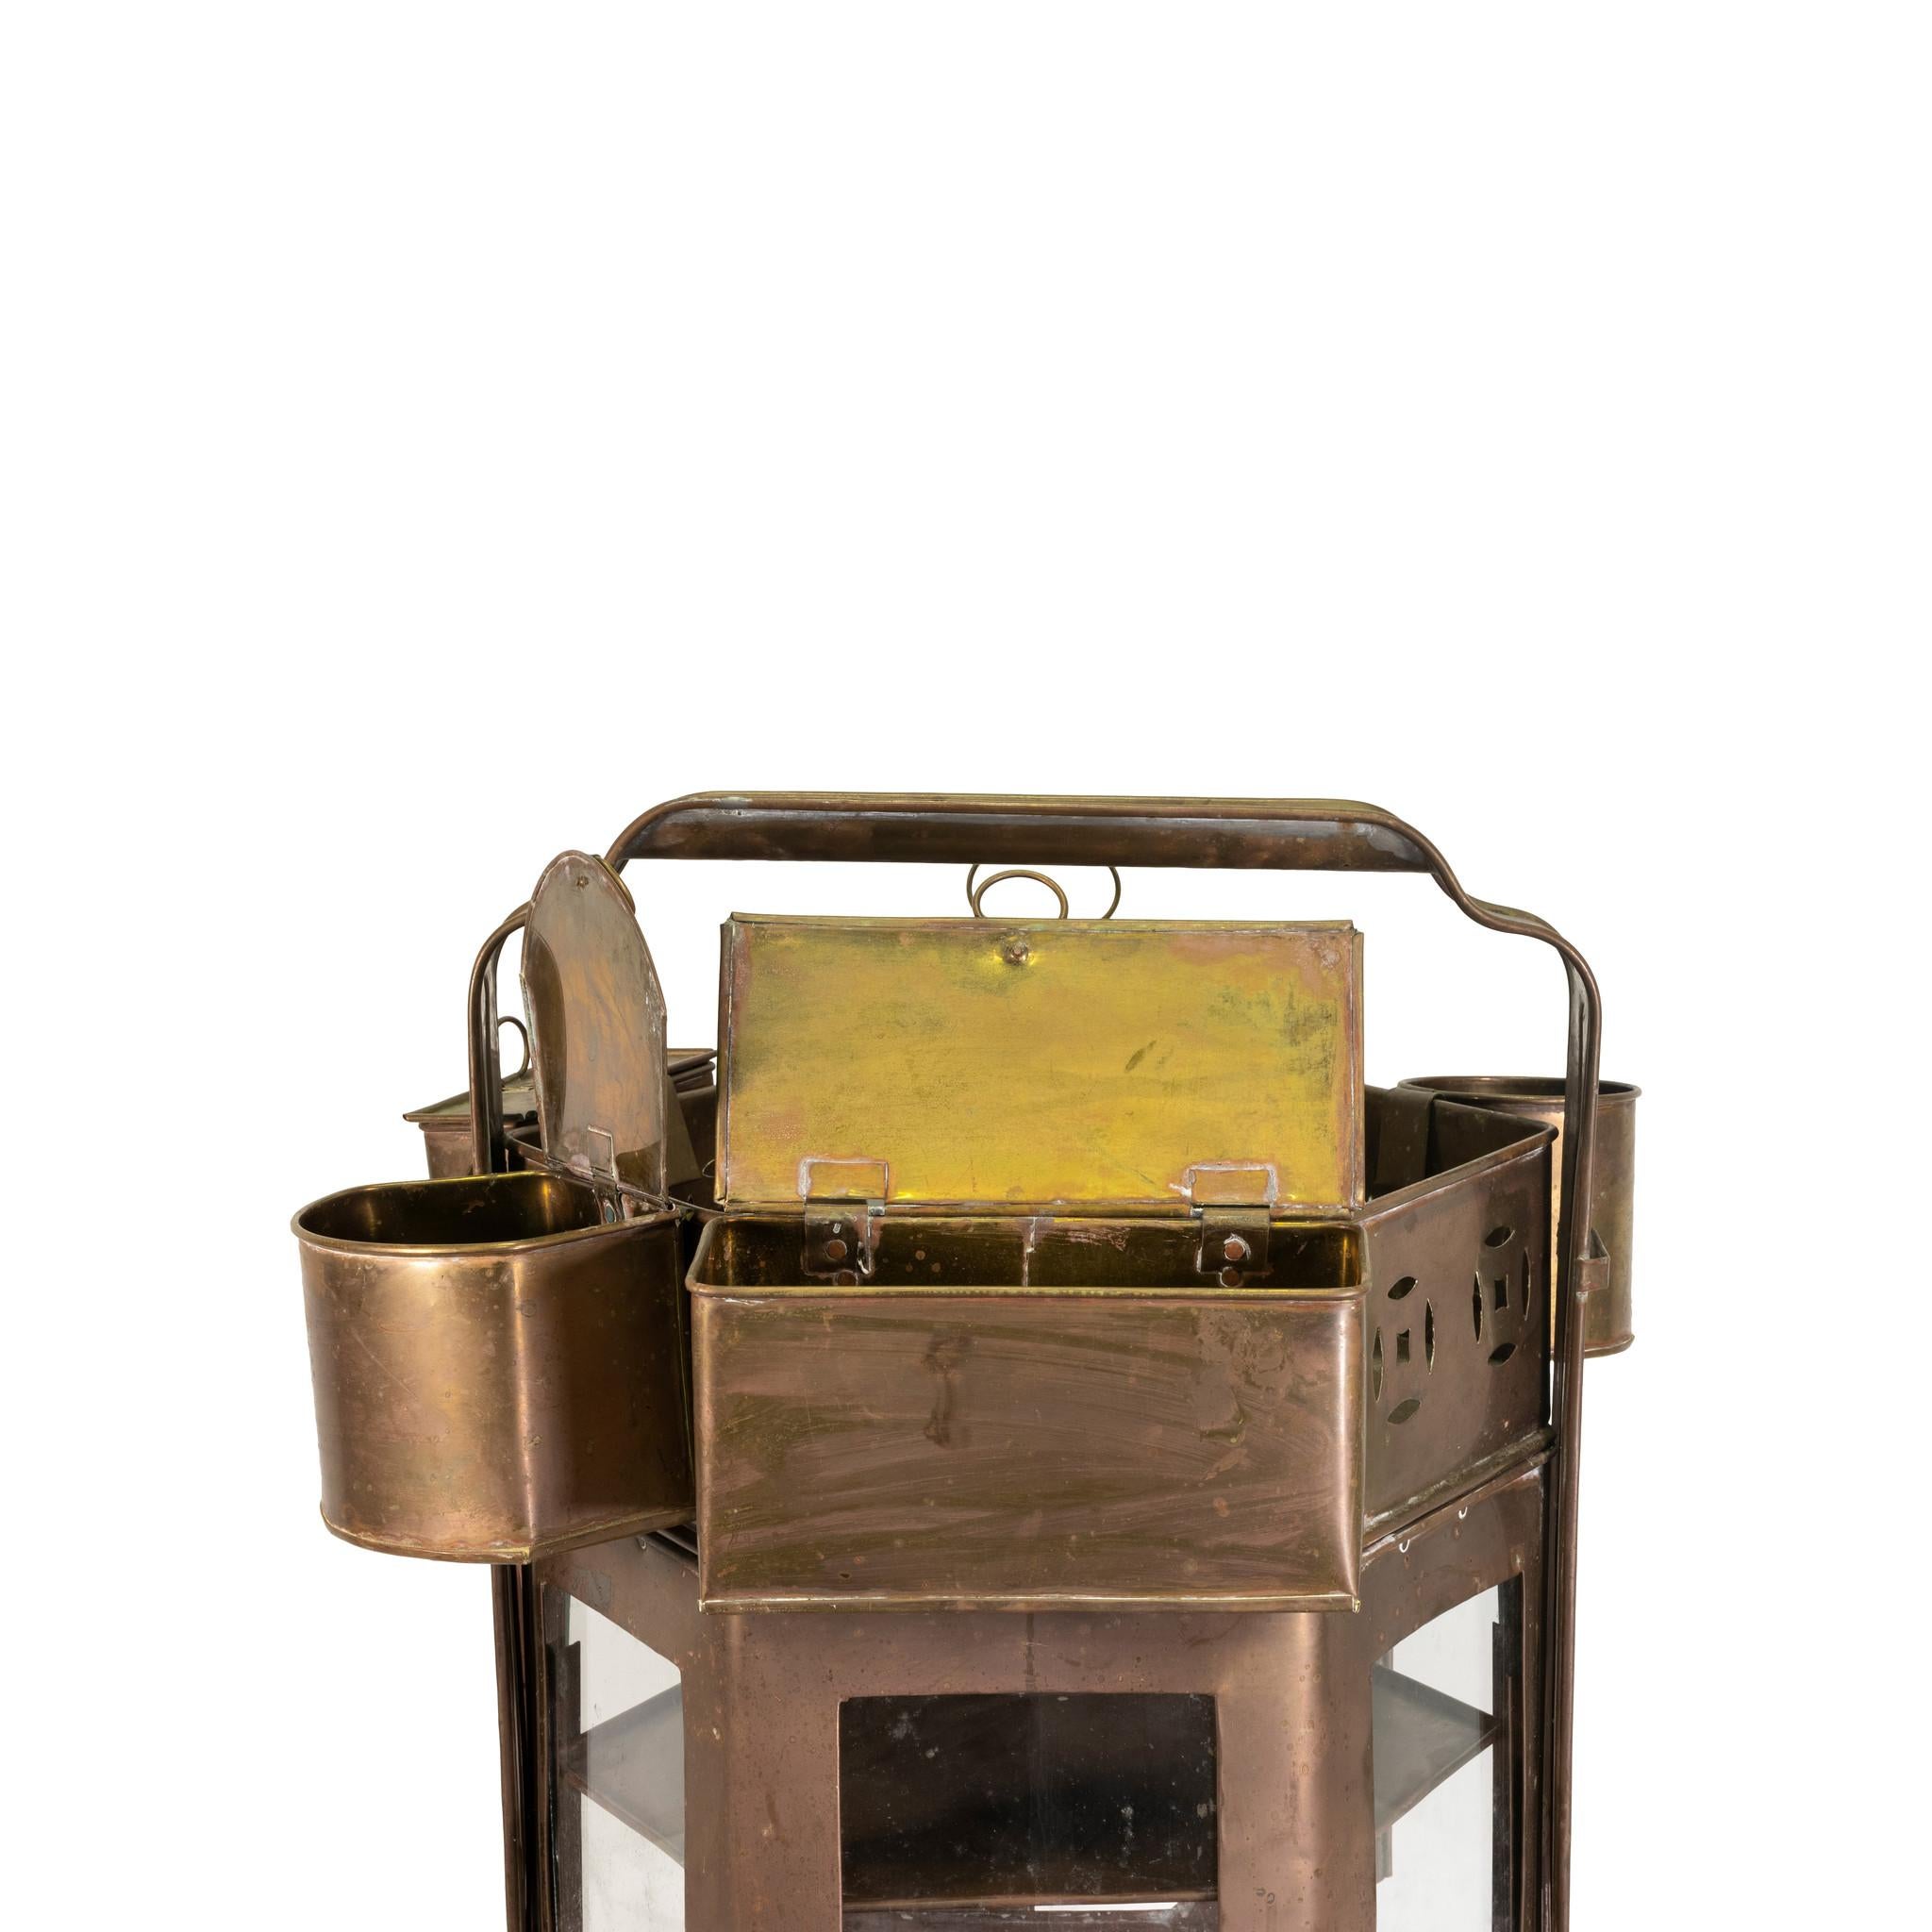 This was used by Asian street vendors to sell noodle dishes to the public. (Also known as a street vendor noodle cart). The unit has four glass panels, back opening door, a shelf and underneath compartment for coals. It has three hinged compartments